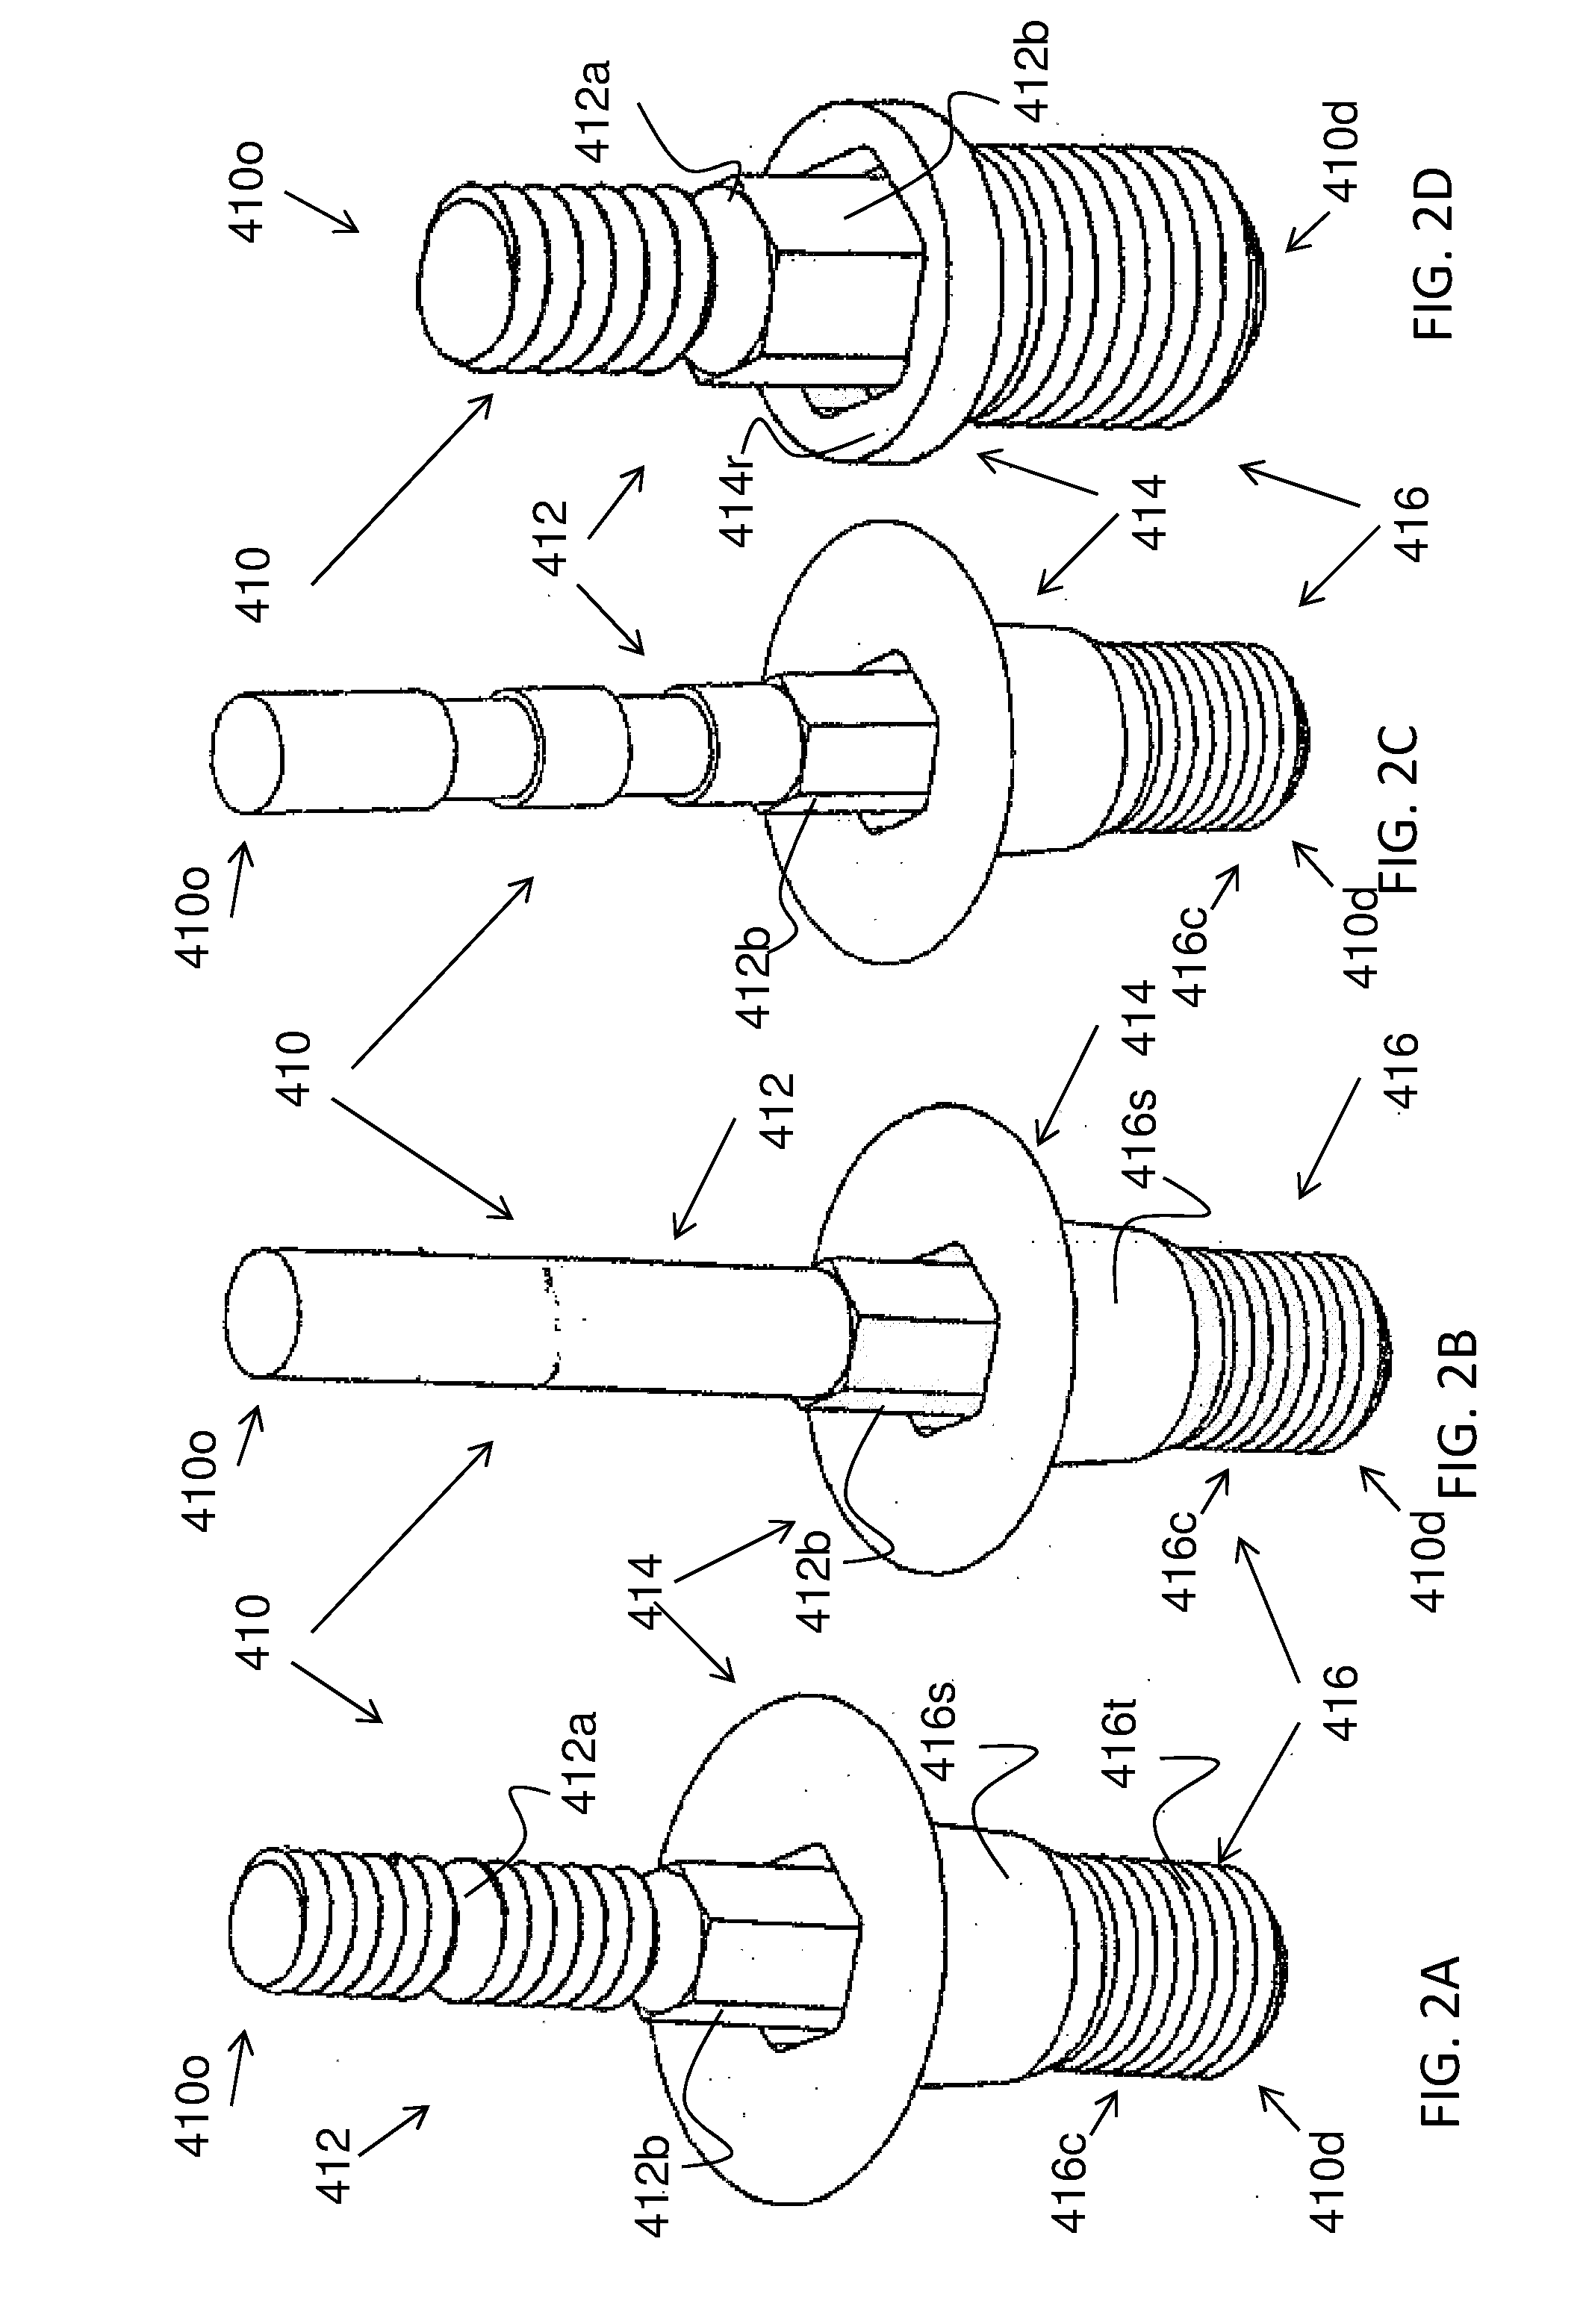 Dental implant device, system and method of use